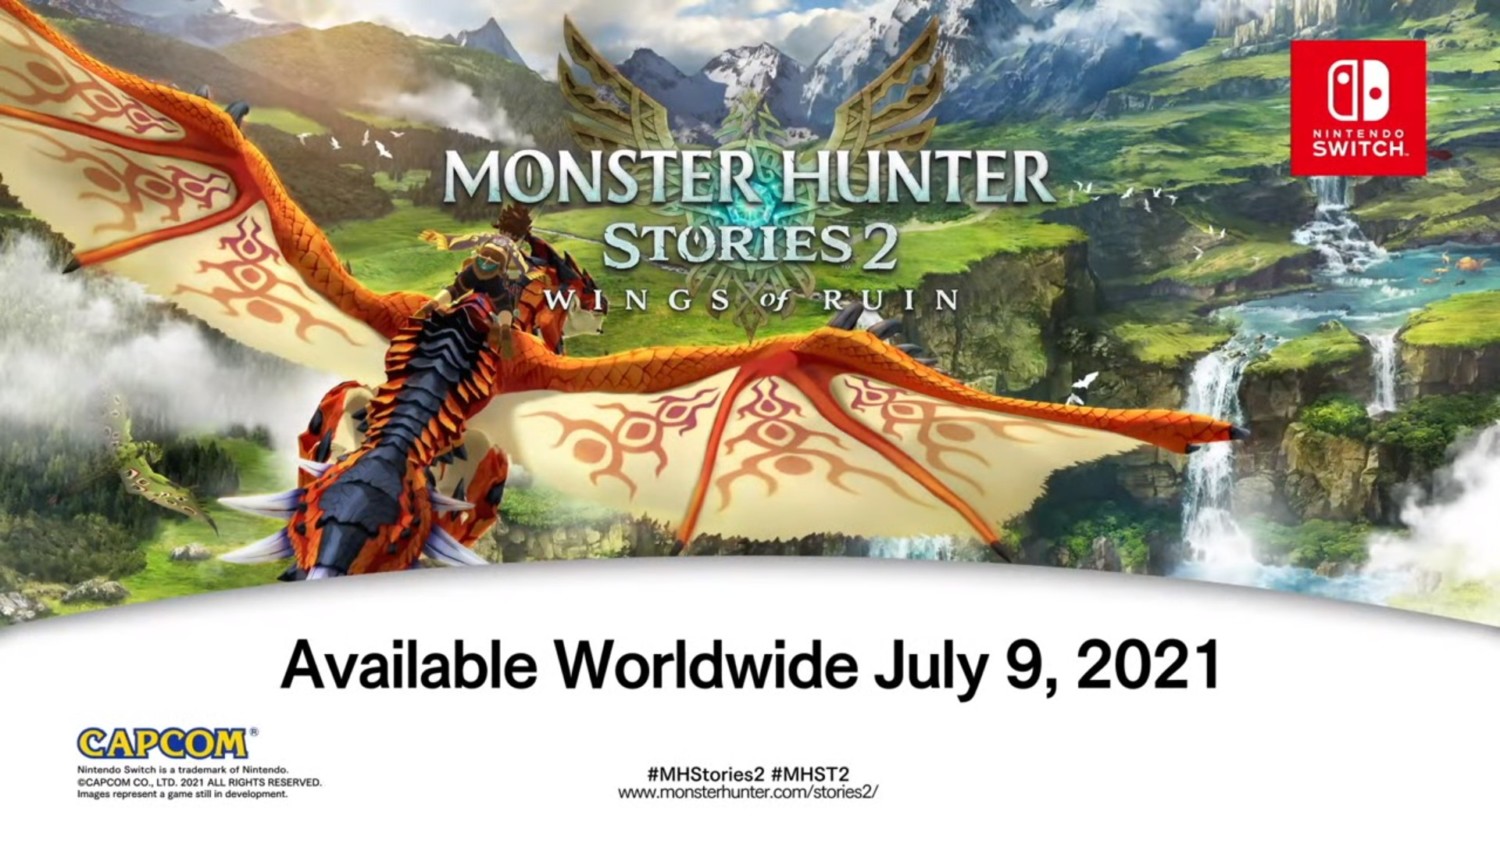 Monster Hunter Pre-Order Bonus NintendoSoup Wings Launches 9, And Revealed – Stories 2: Deluxe Of July Edition Ruin